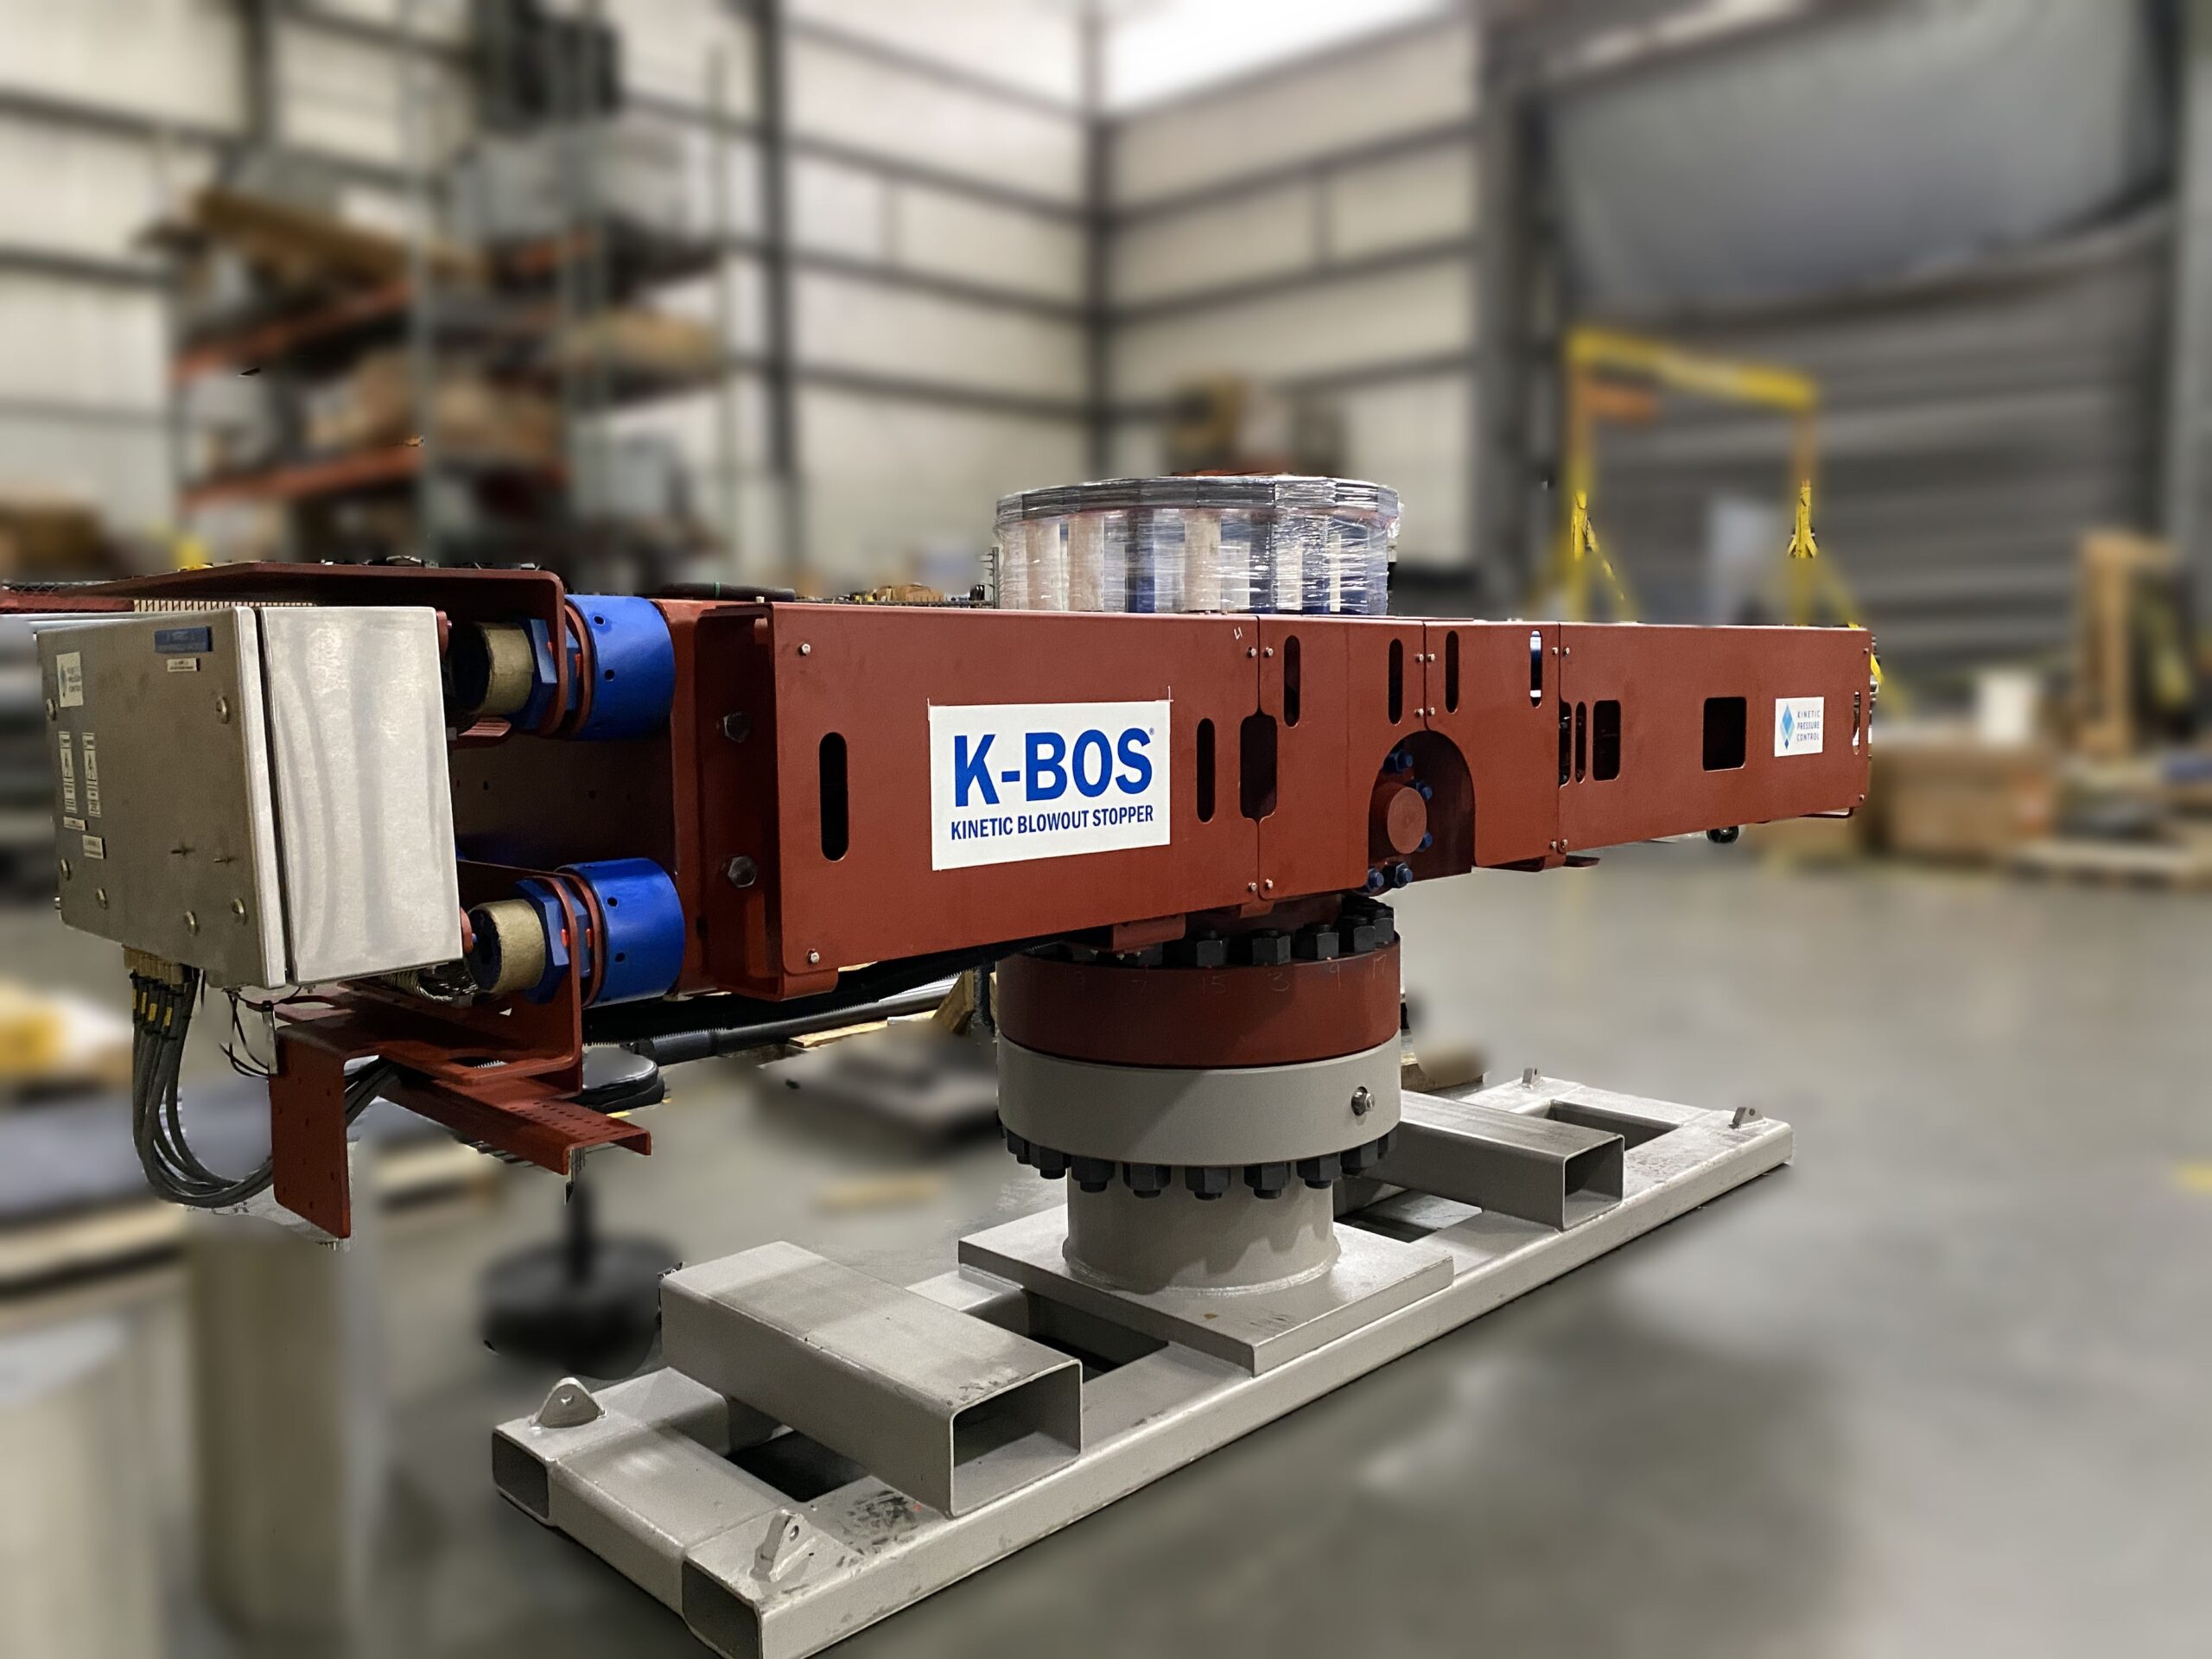 13-10M K-BOS for surface drilling